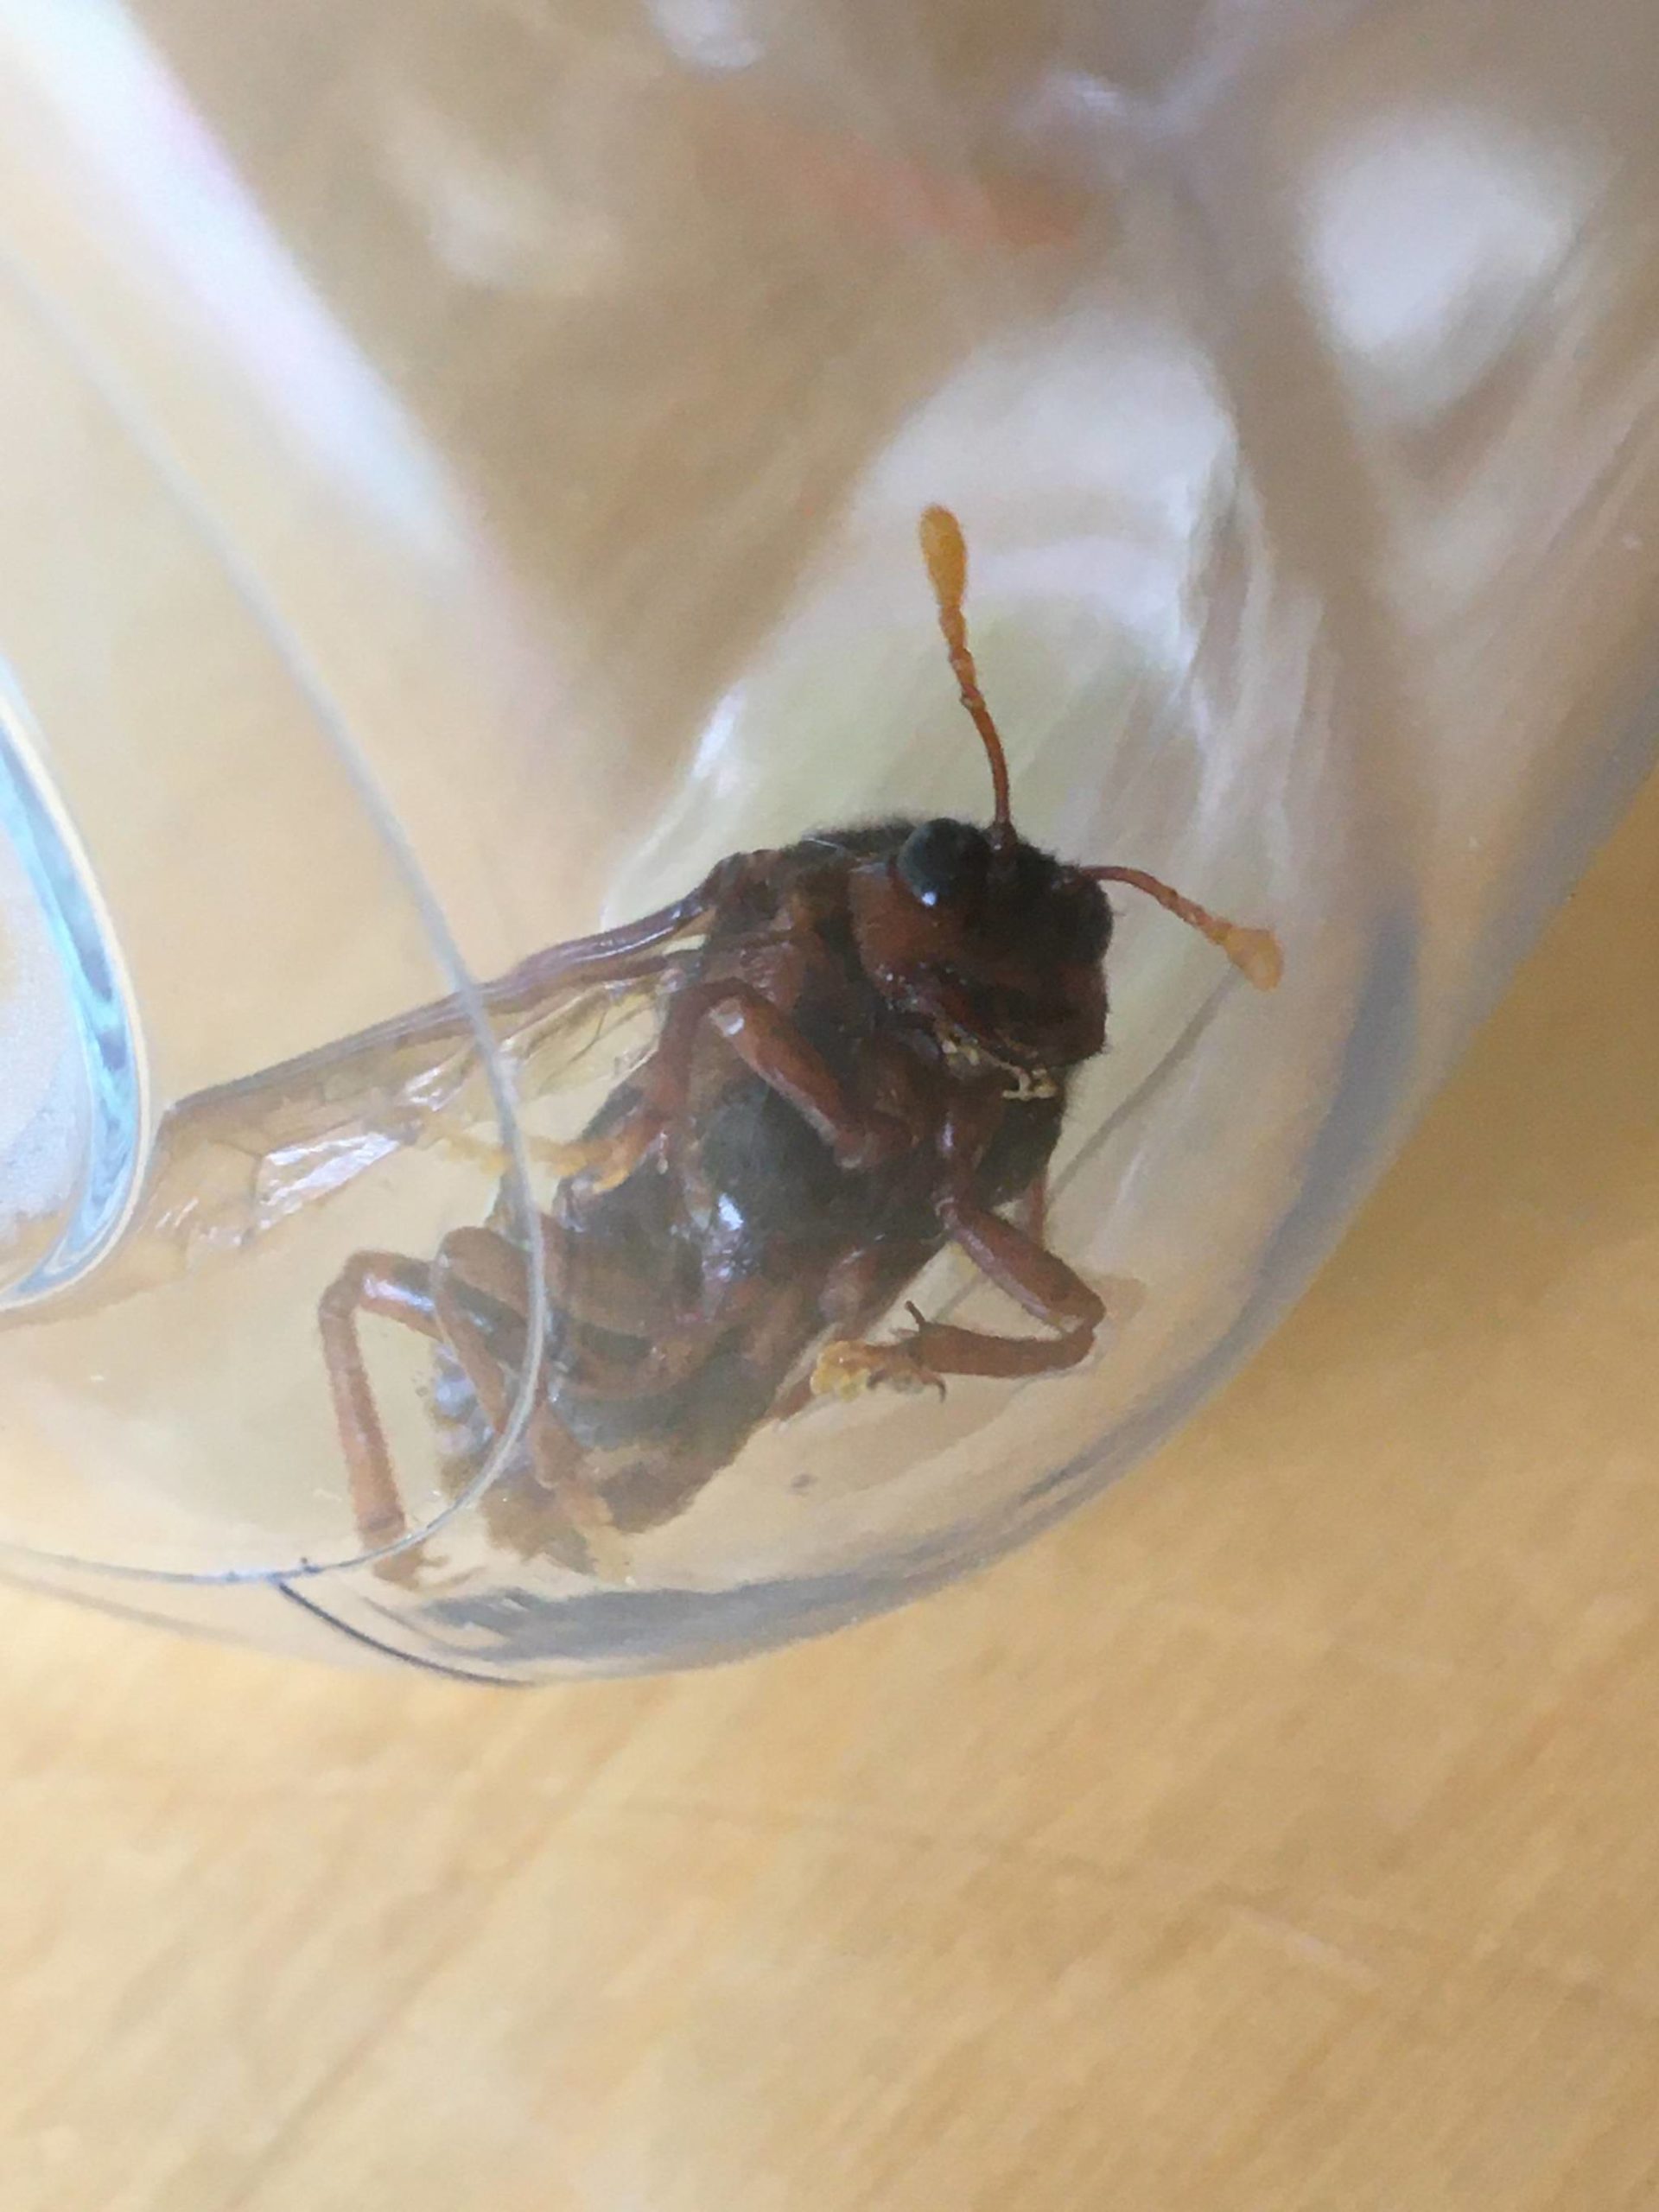 Here is the critter Scott Seagren found on his property on Green Valley Road. Although it has not been confirmed, Seagren said he has his doubts it’s a murder hornet. Courtesy photo